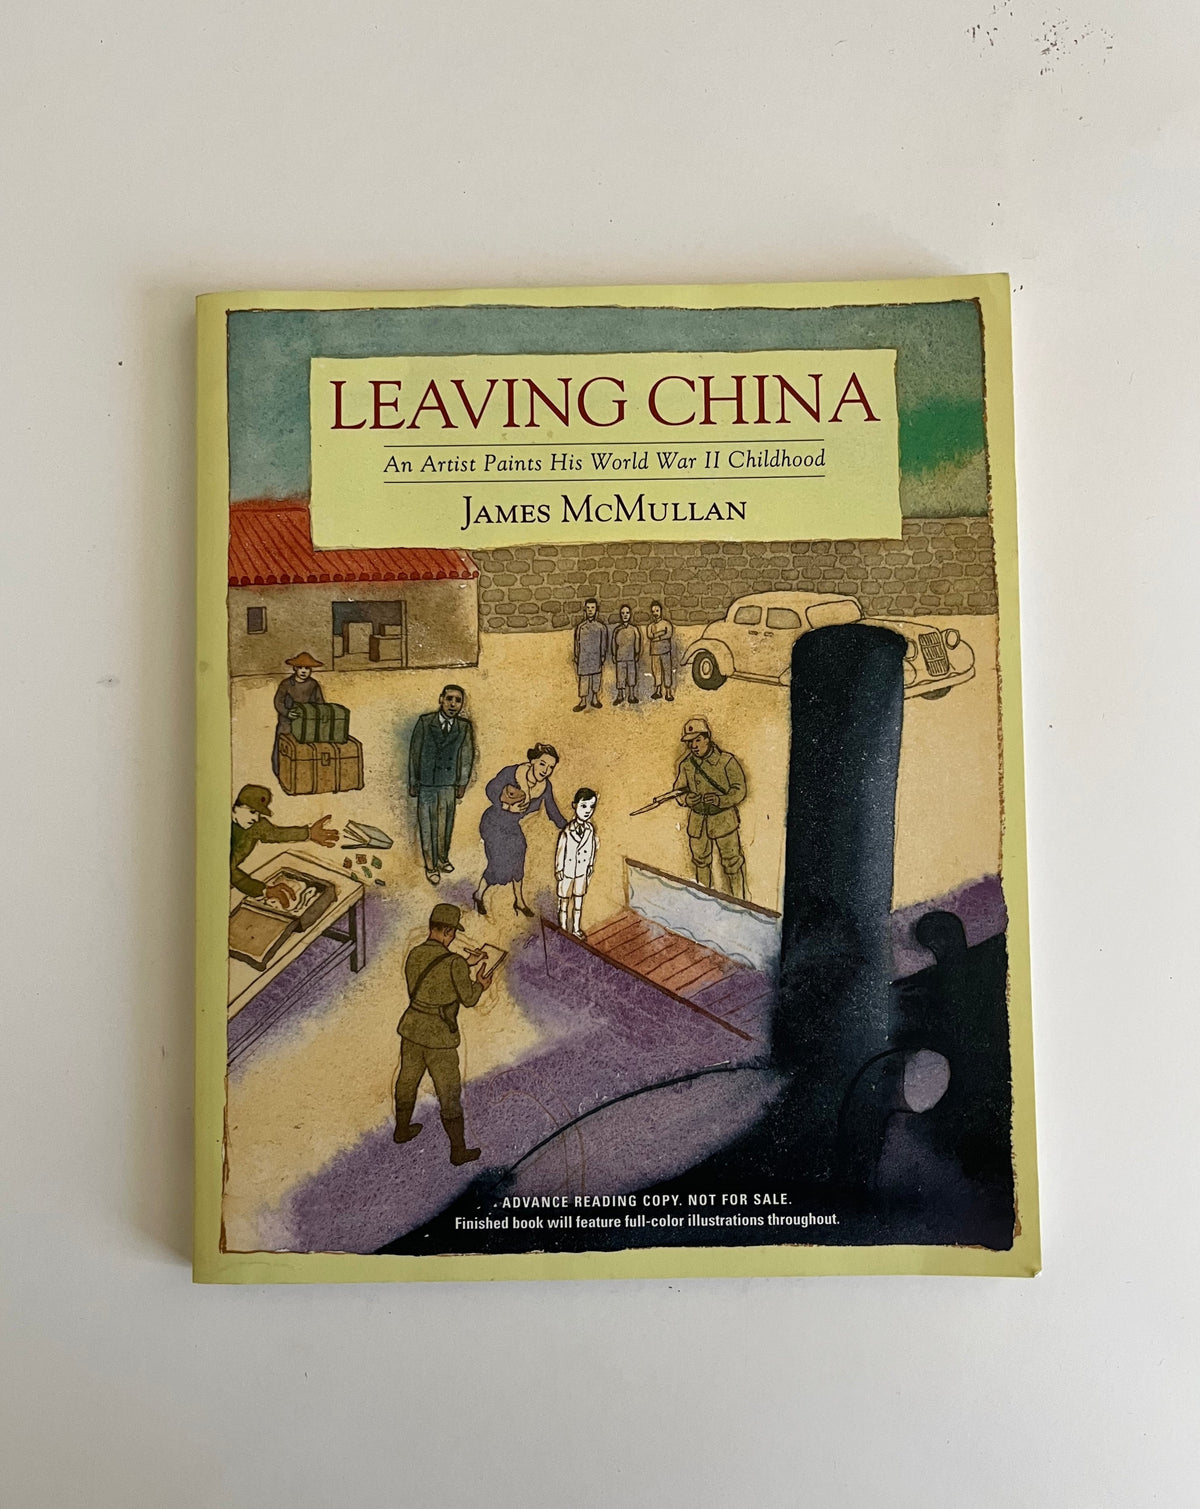 Leaving China: An Artist Paints his WWII Childhood by James McMullan